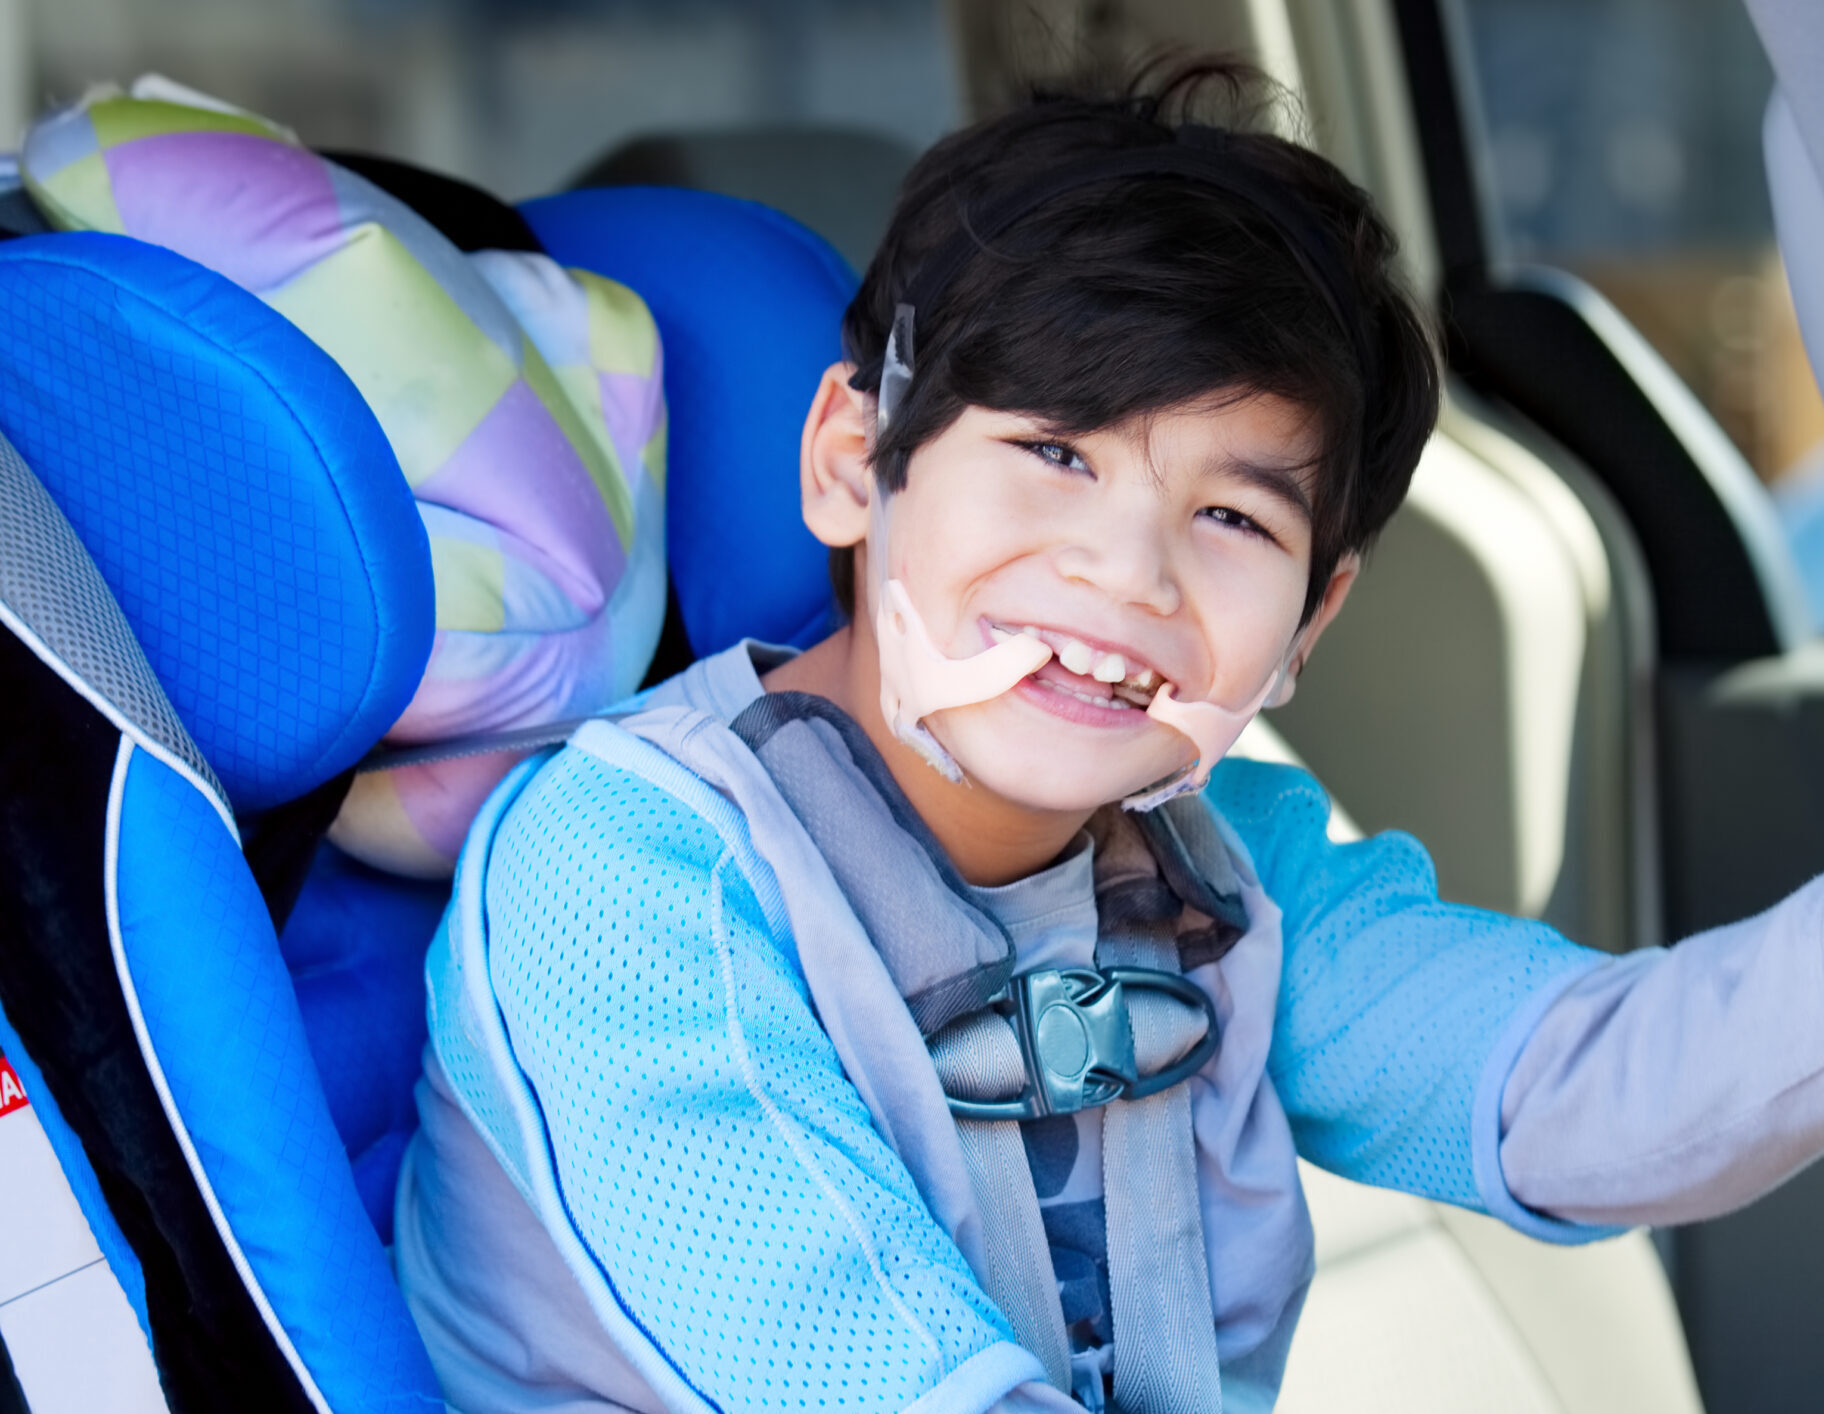 A six year old boy with disabilities in a car seat